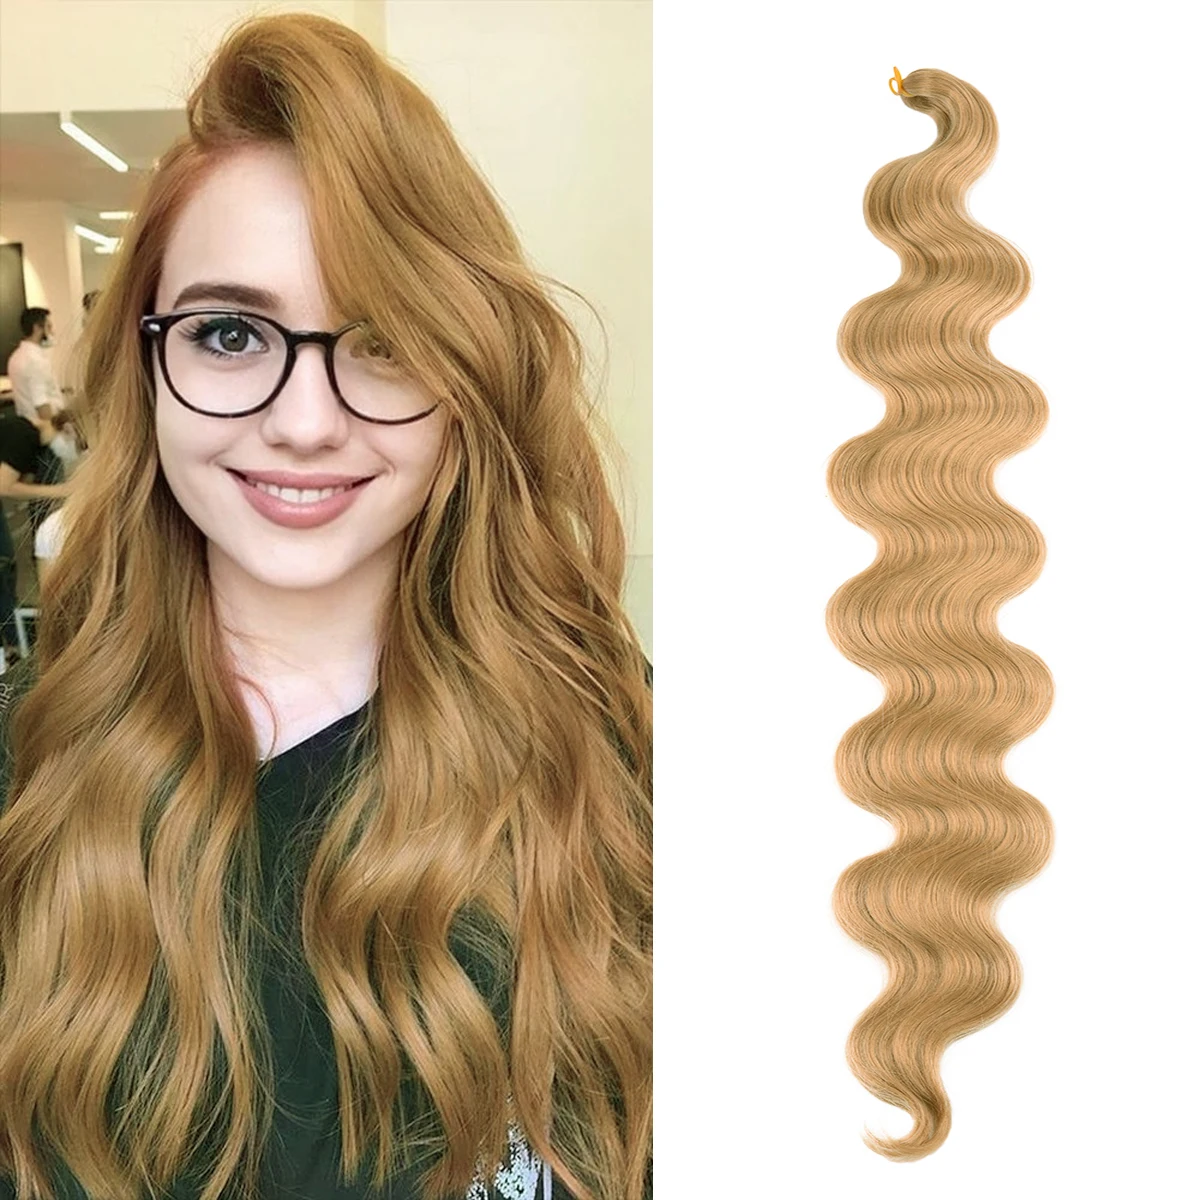 Chorliss Body Wave Crochet Hair 24Inch Soft Long Synthetic Hair Braids Natural Wavy Ombre 613 Blonde Hair Extensions